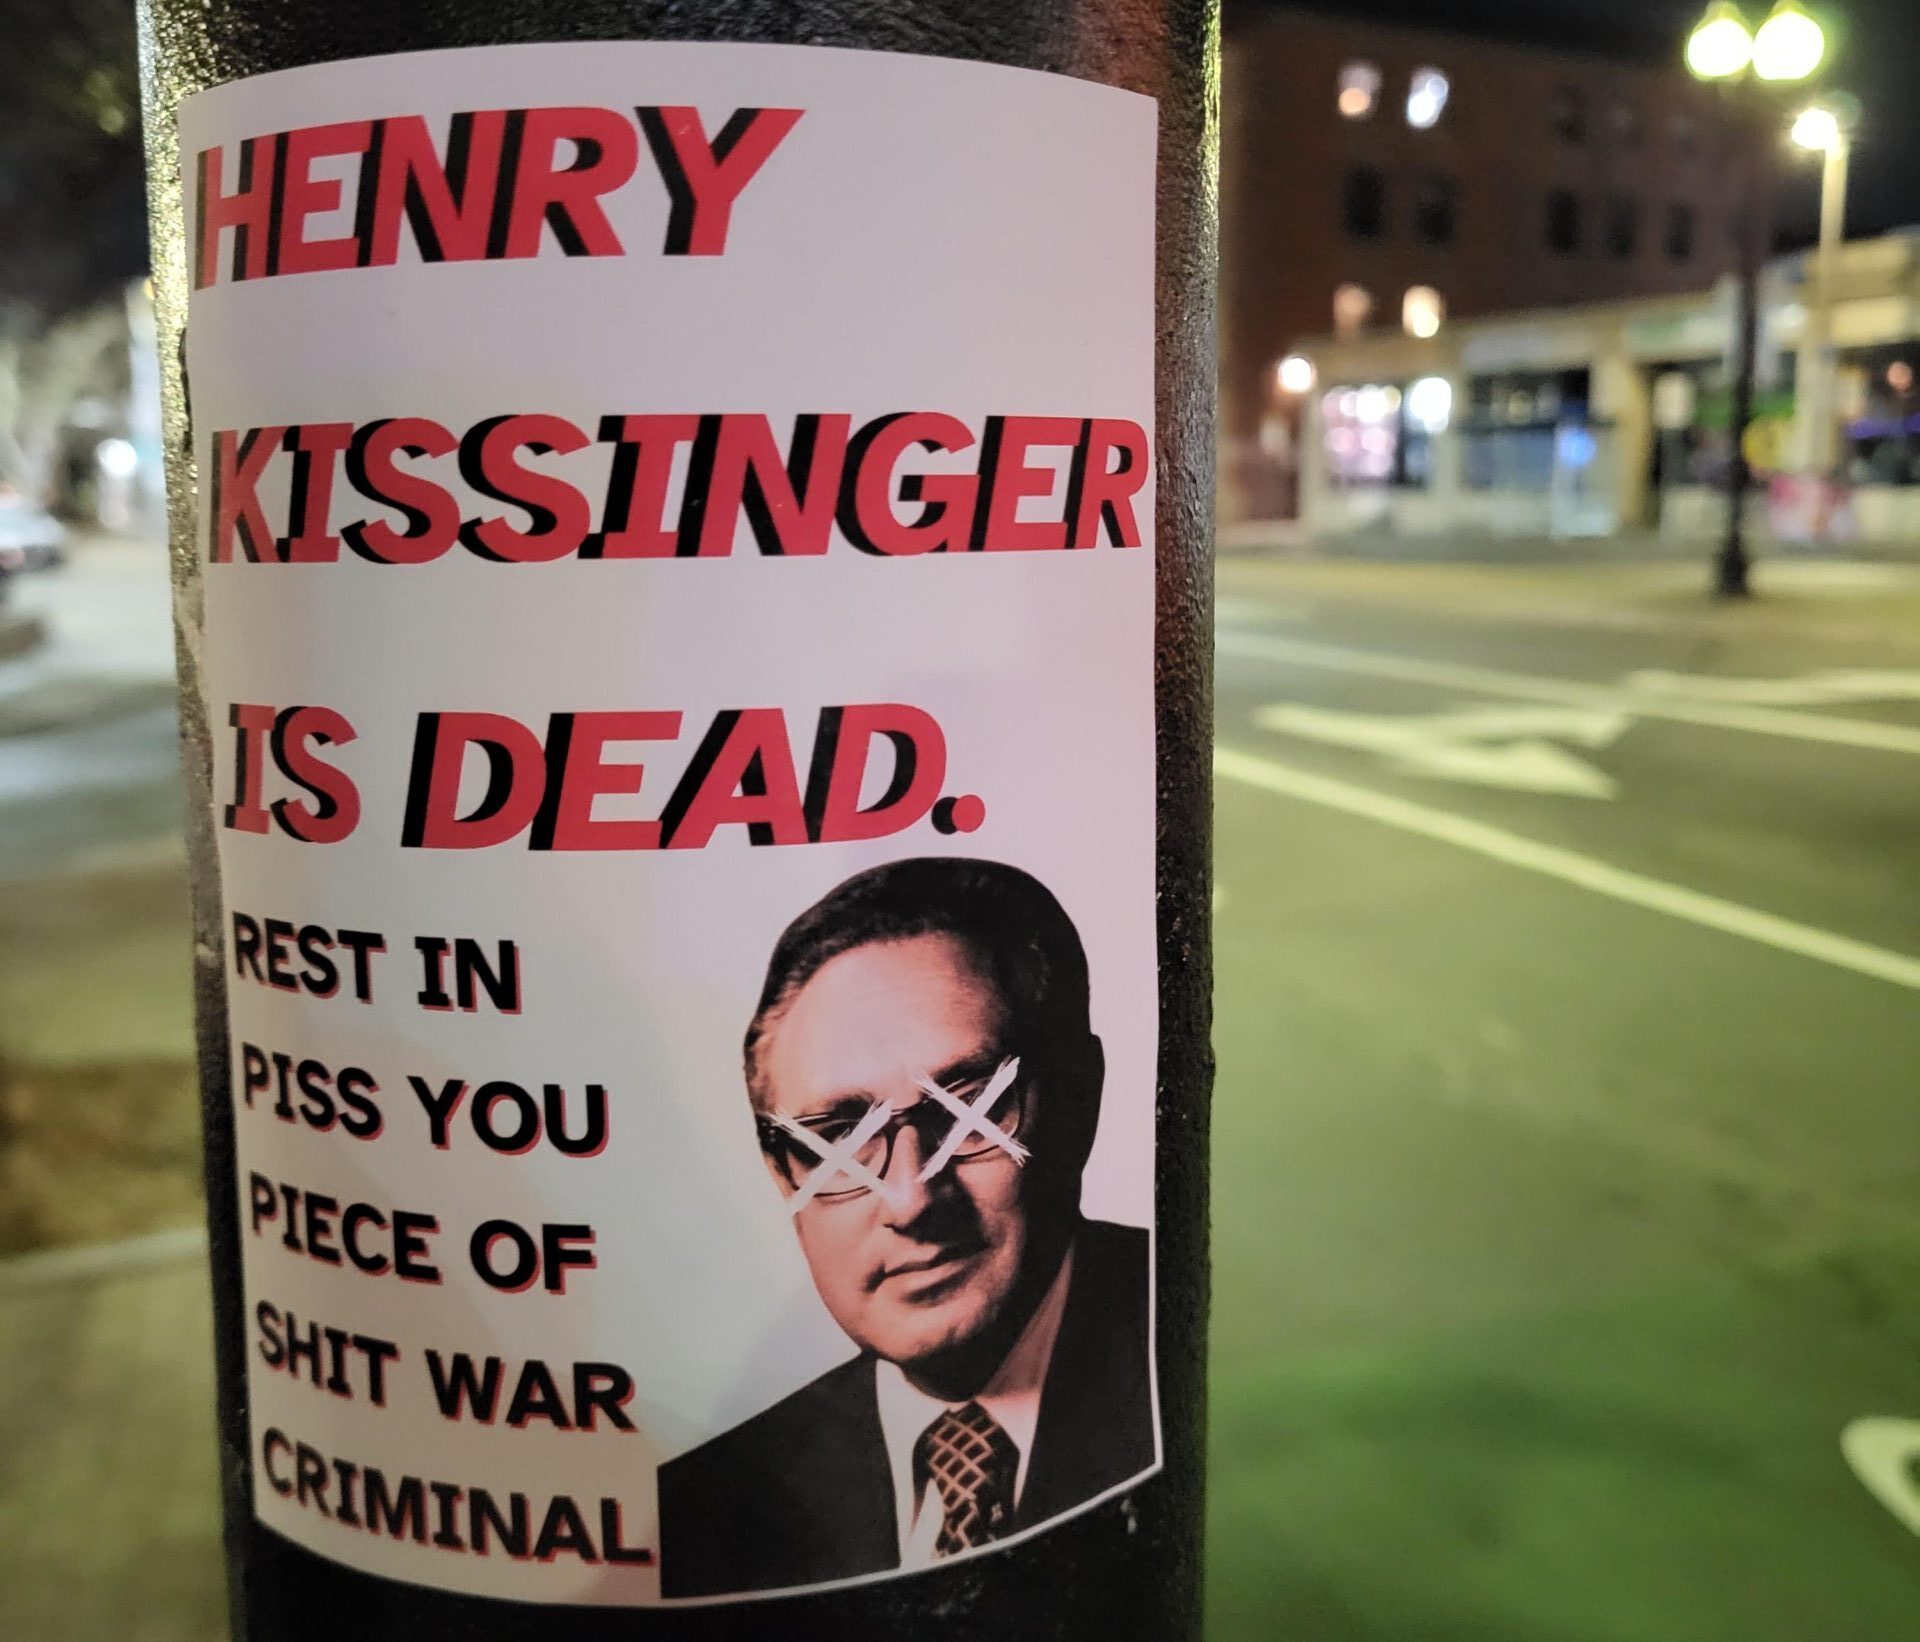 Submission: Kissinger is Dead, Celebrate